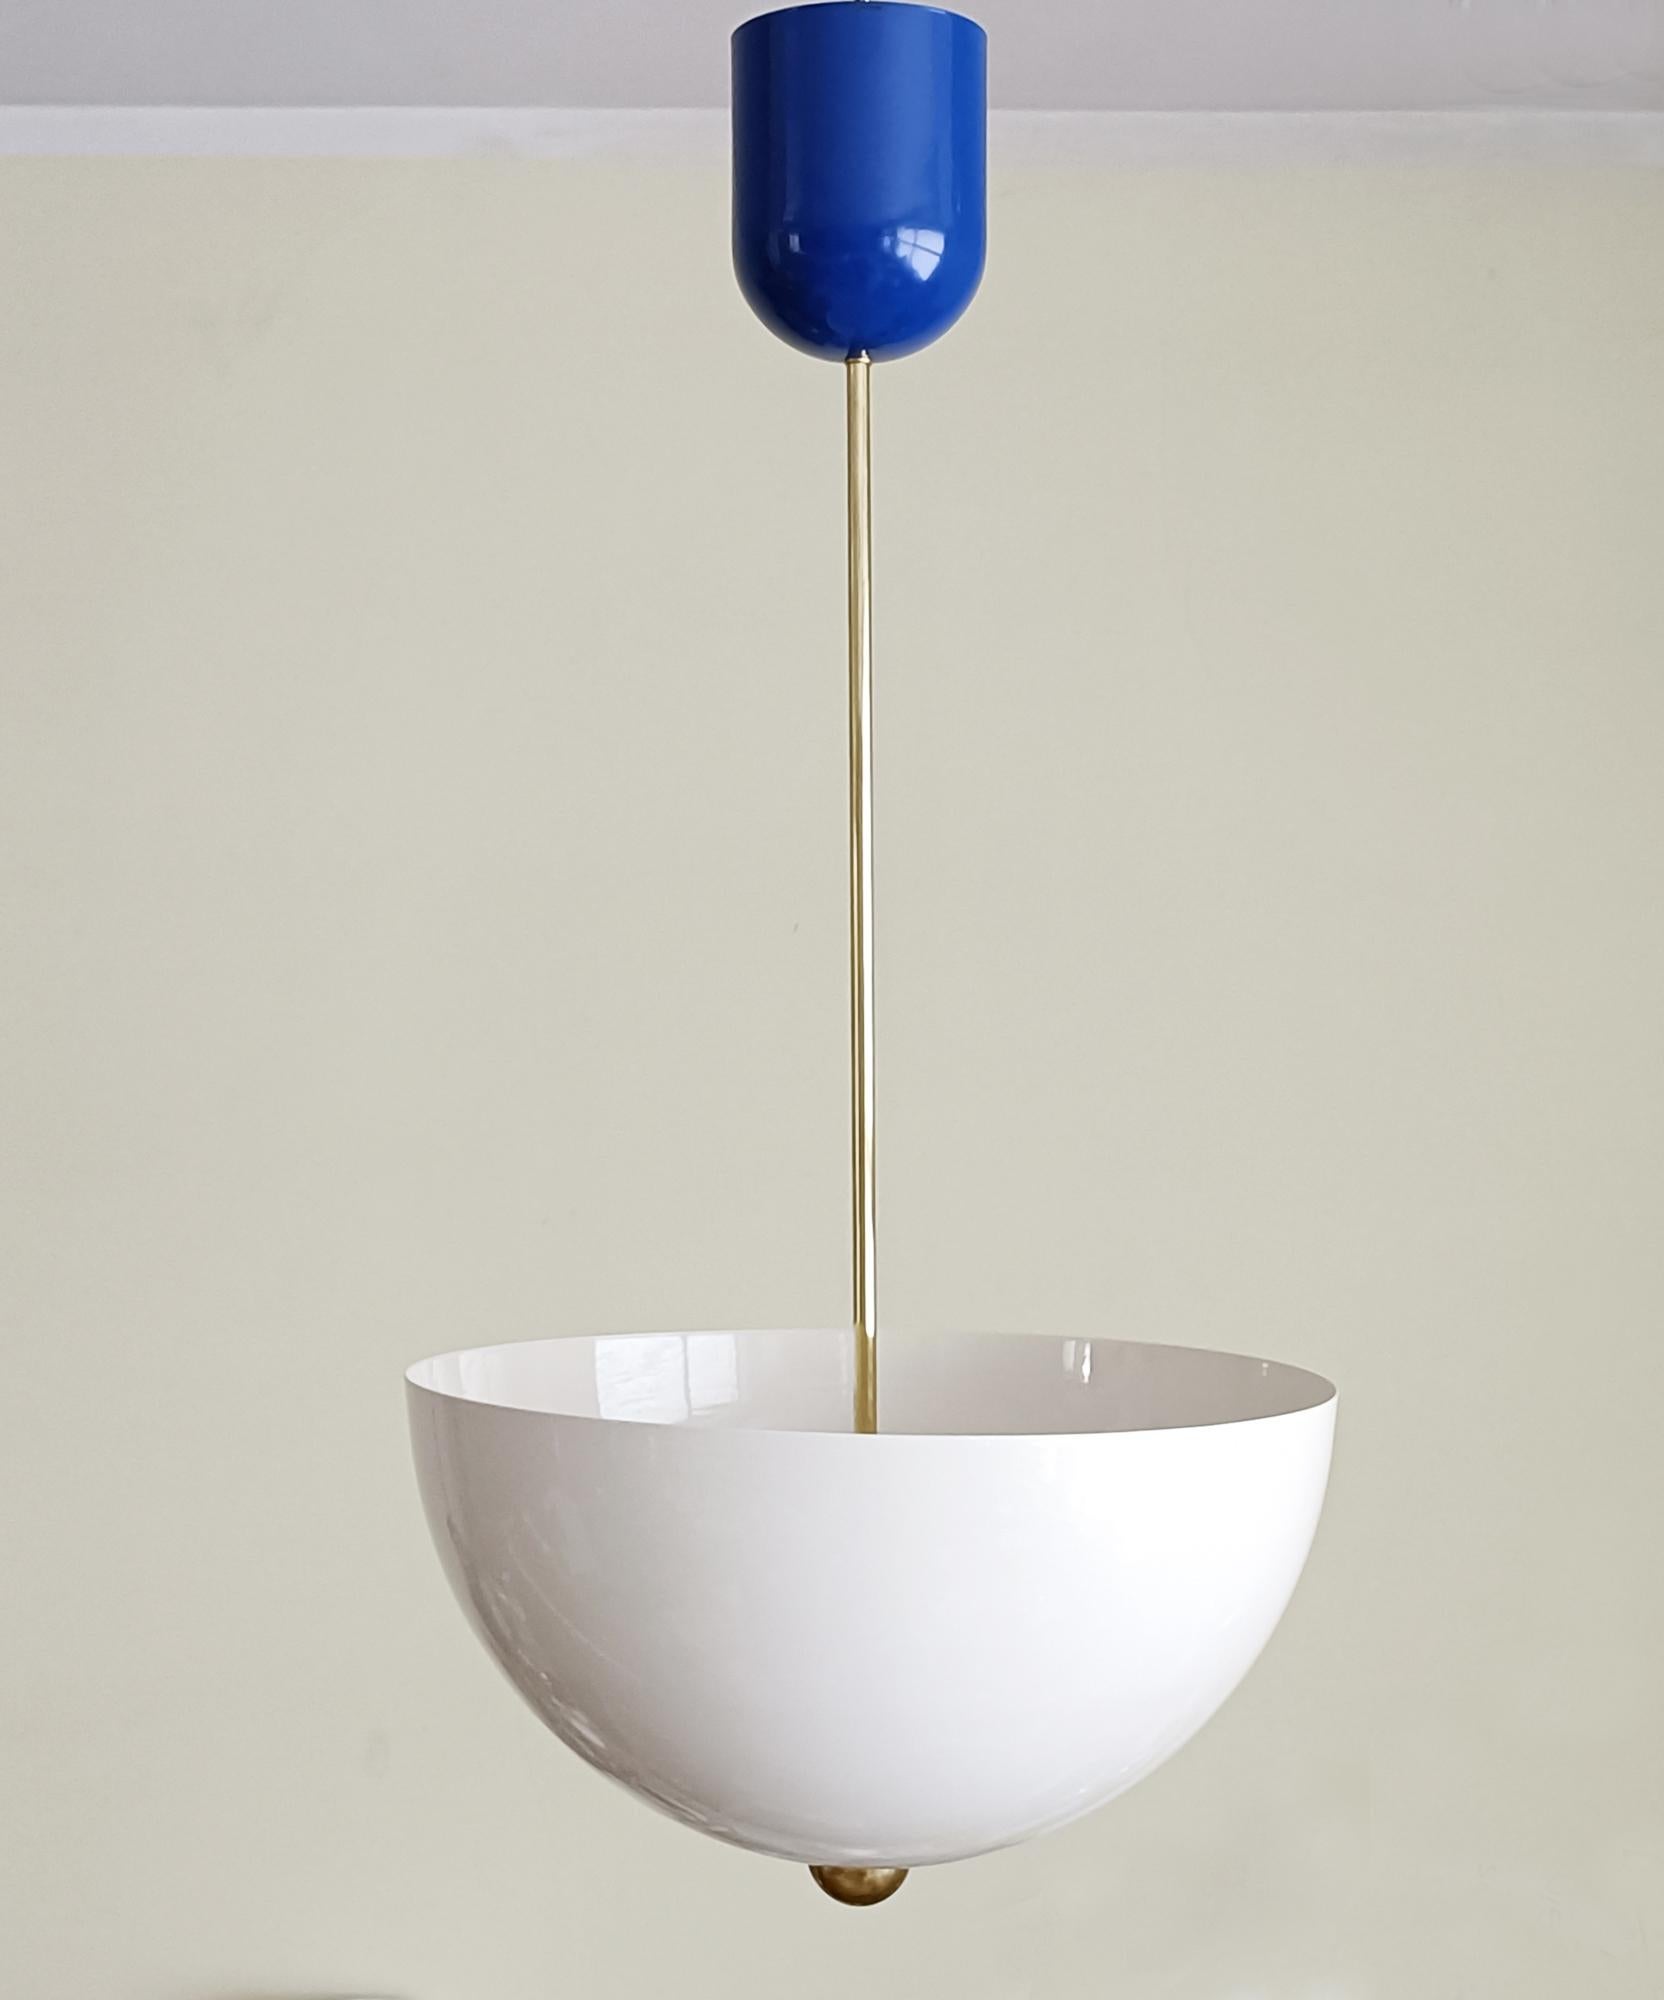 LEBOS is a large bowl shape pendant made of brass and steel powder painted in high gloss finish.

Diameter 37 cm / presented height 75 cm (other height to order, can be also made as semi-flush)

Available also in other diameters - up to 100 cm